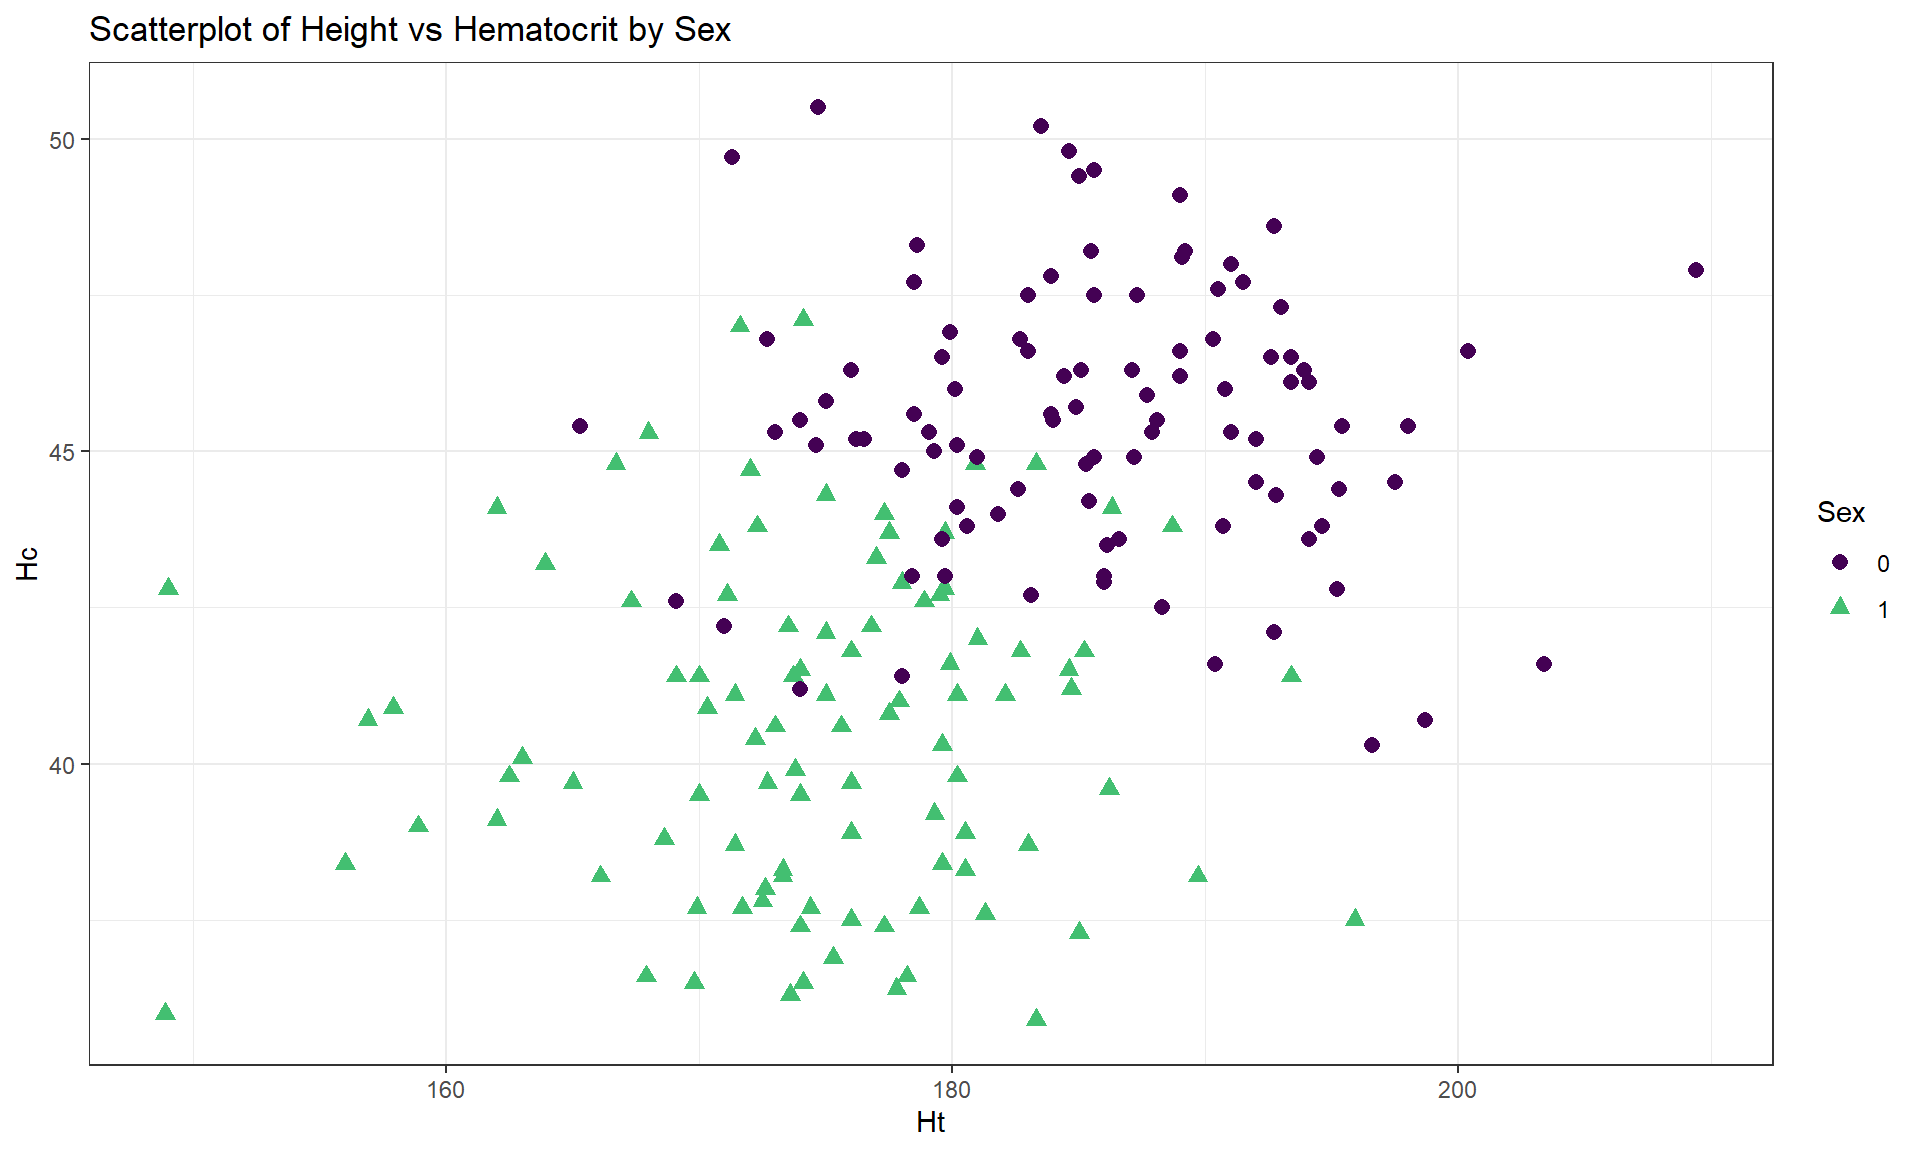 Scatterplot of athlete’s height and hematocrit by sex of athletes. Males were coded as 0s and females as 1s.